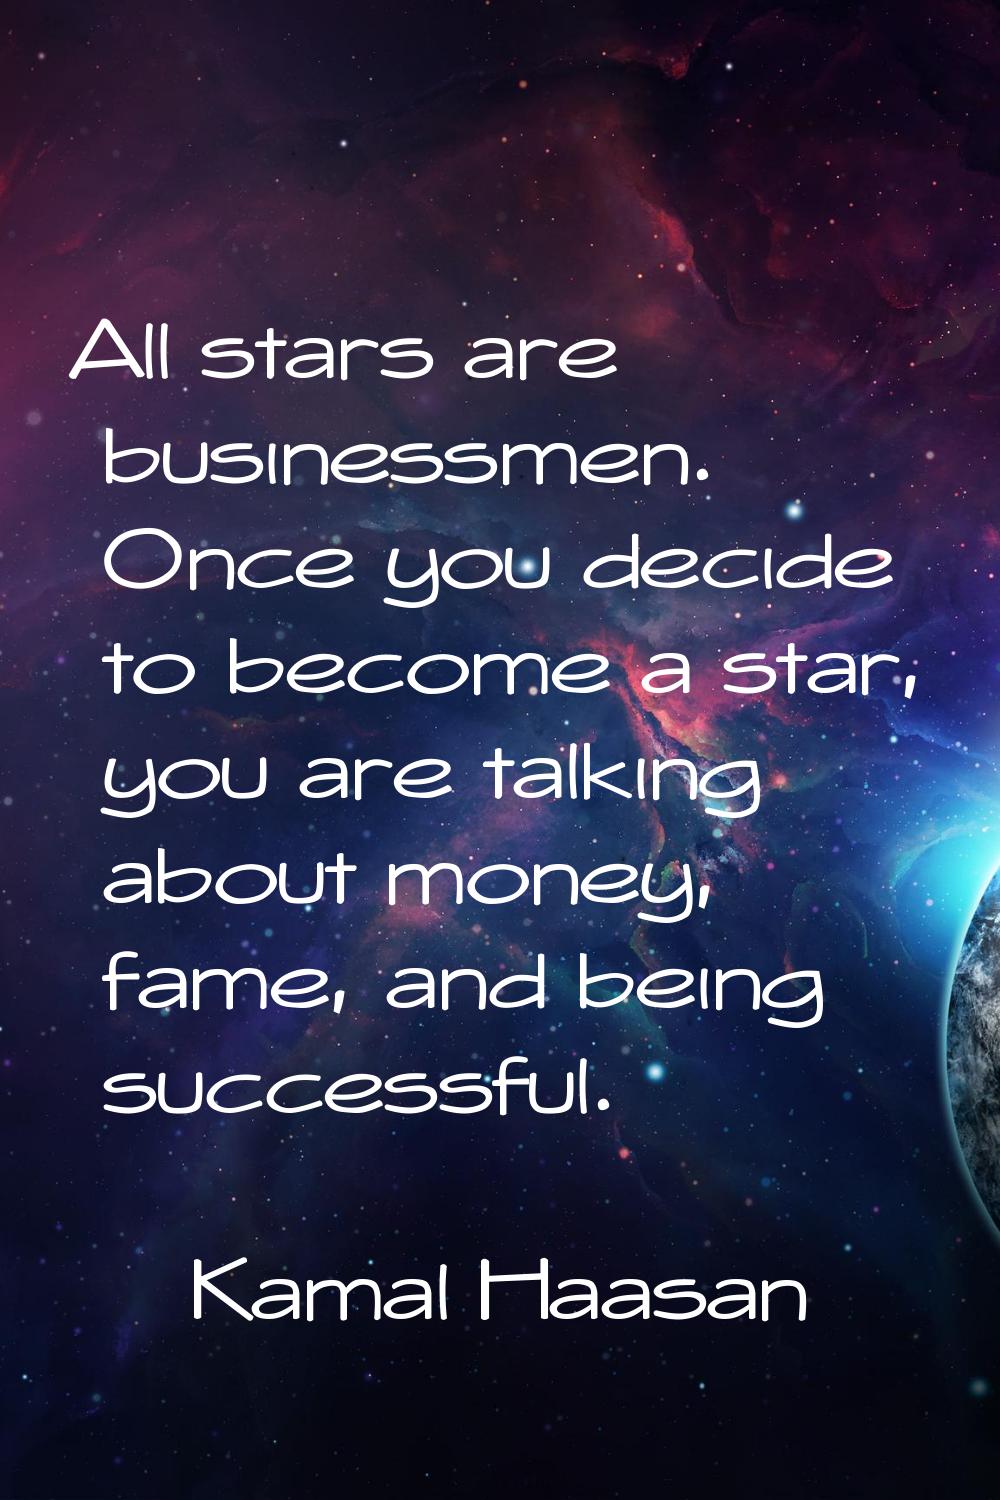 All stars are businessmen. Once you decide to become a star, you are talking about money, fame, and